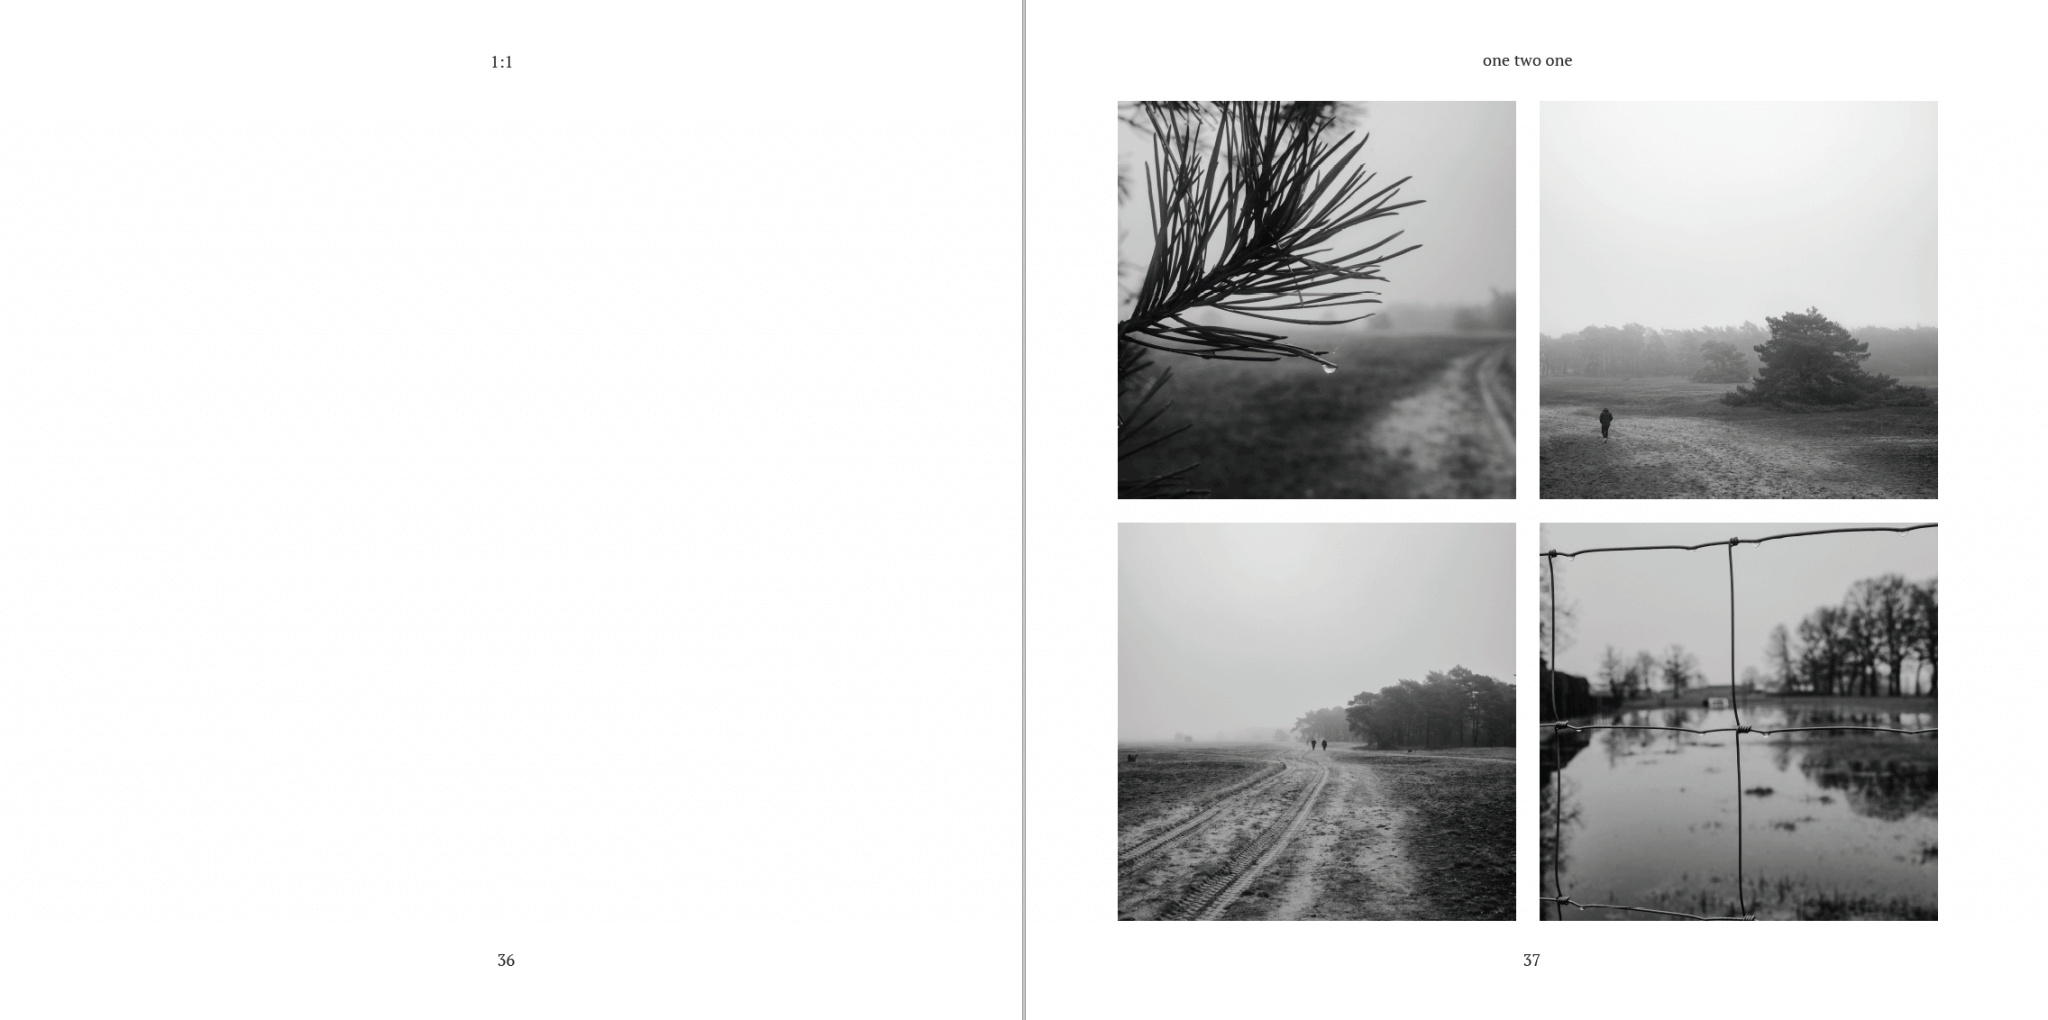 Mitchel Lensink de lens photography project one two one book